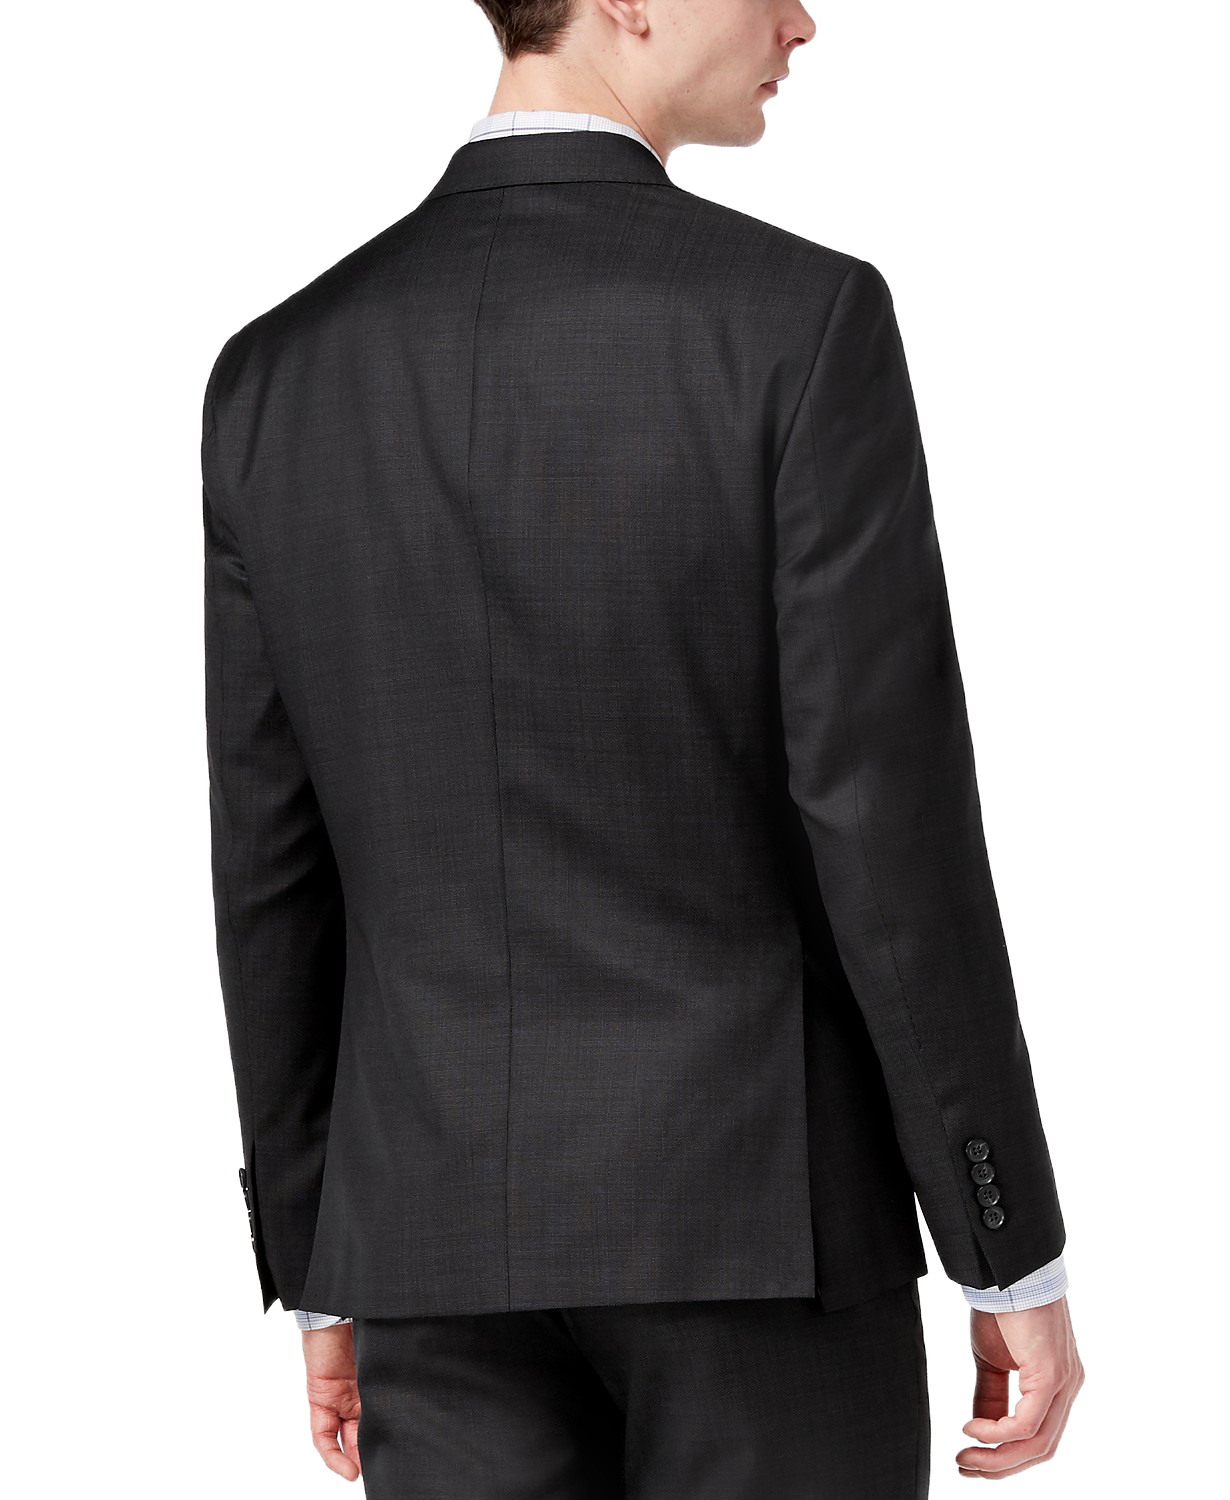 www.couturepoint.com-dkny-mens-black-wool-modern-fit-stretch-textured-suit-jacket